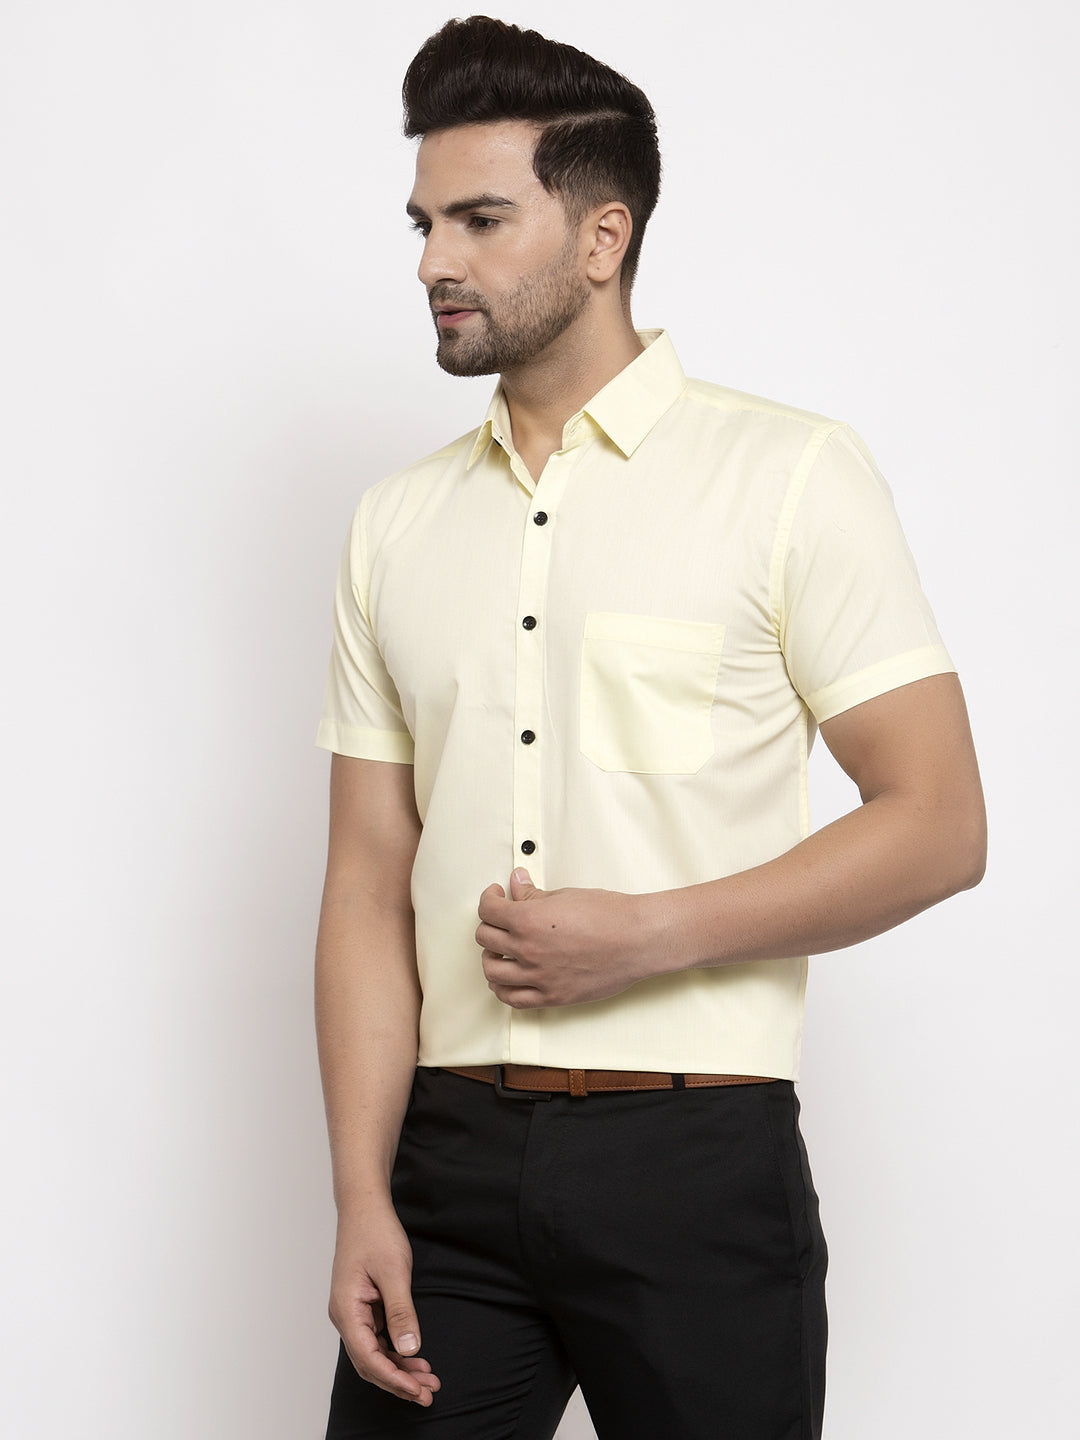 Men's Yellow Cotton Half Sleeves Solid Formal Shirts ( SF 754Lime ) - Jainish